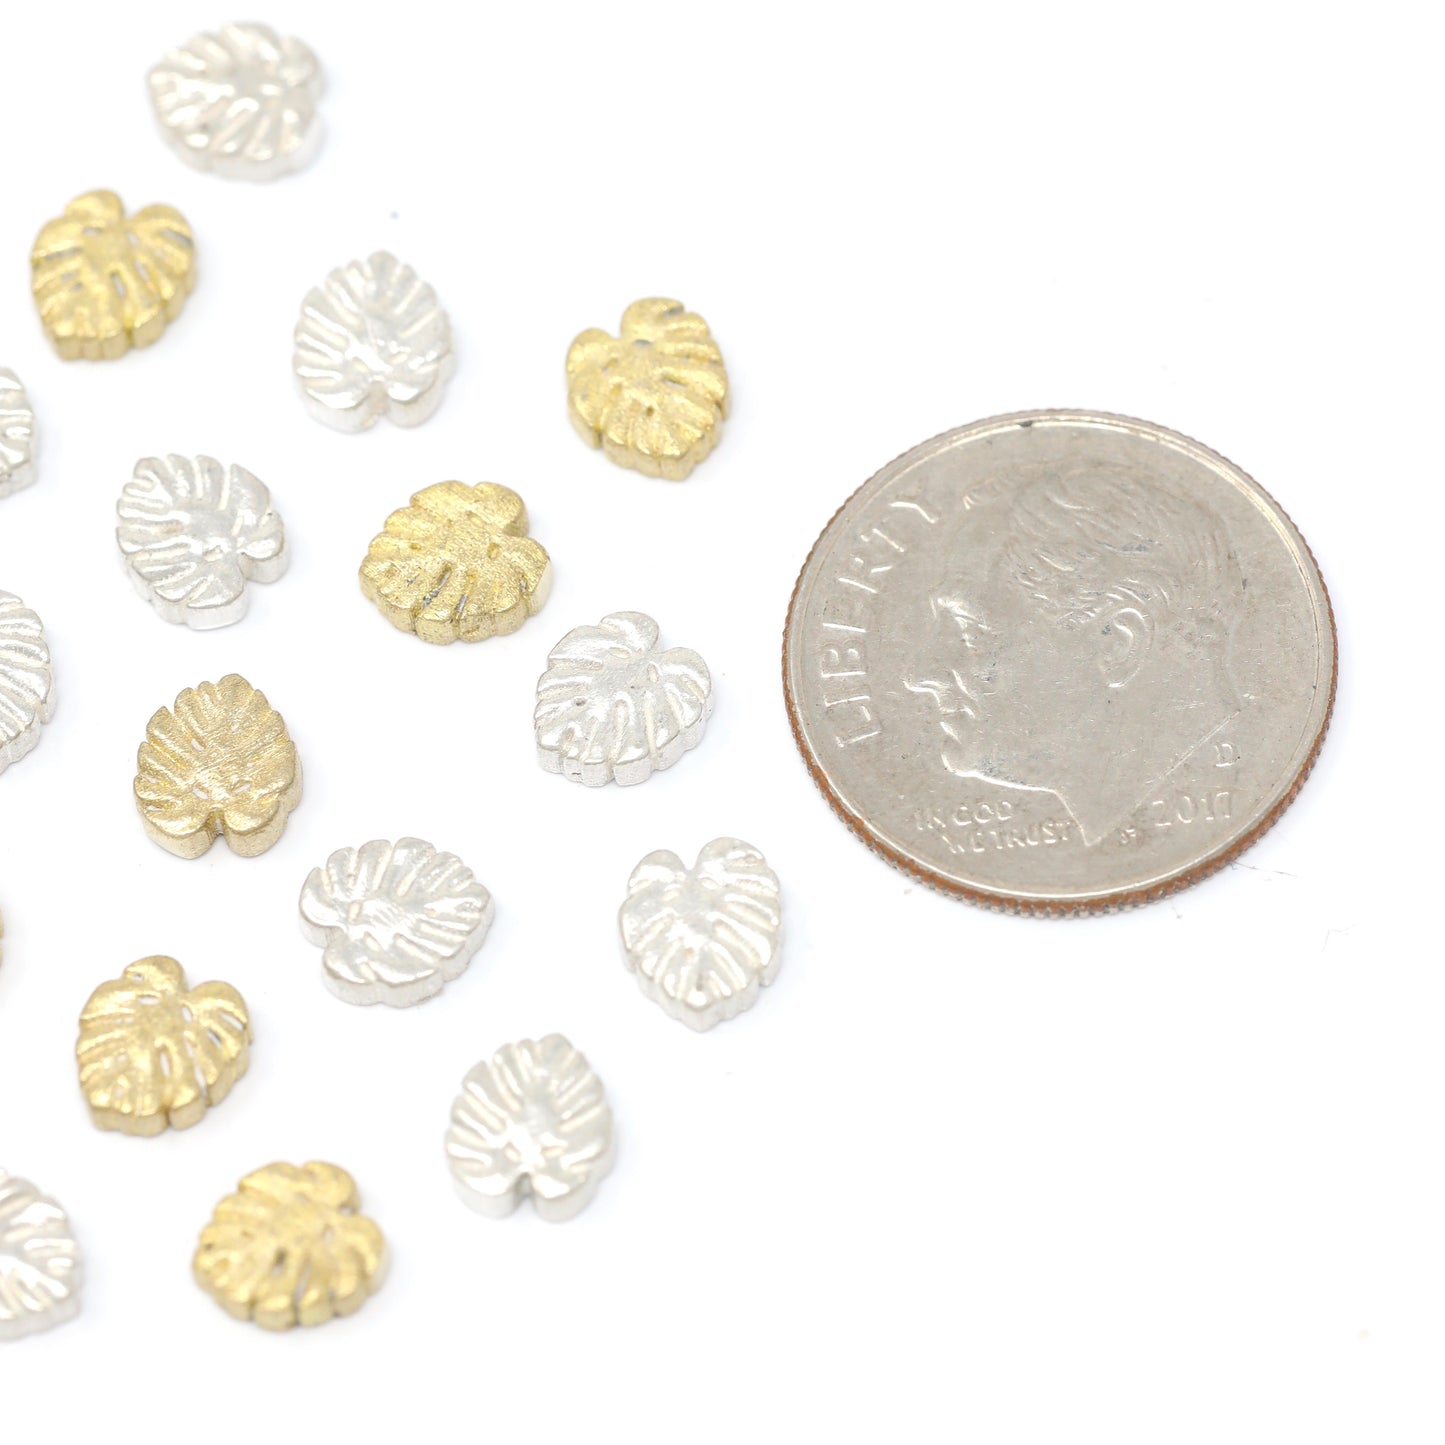 SALE Monstera Leaf Accent Charm Embellishments for Soldering or Jewelry Making